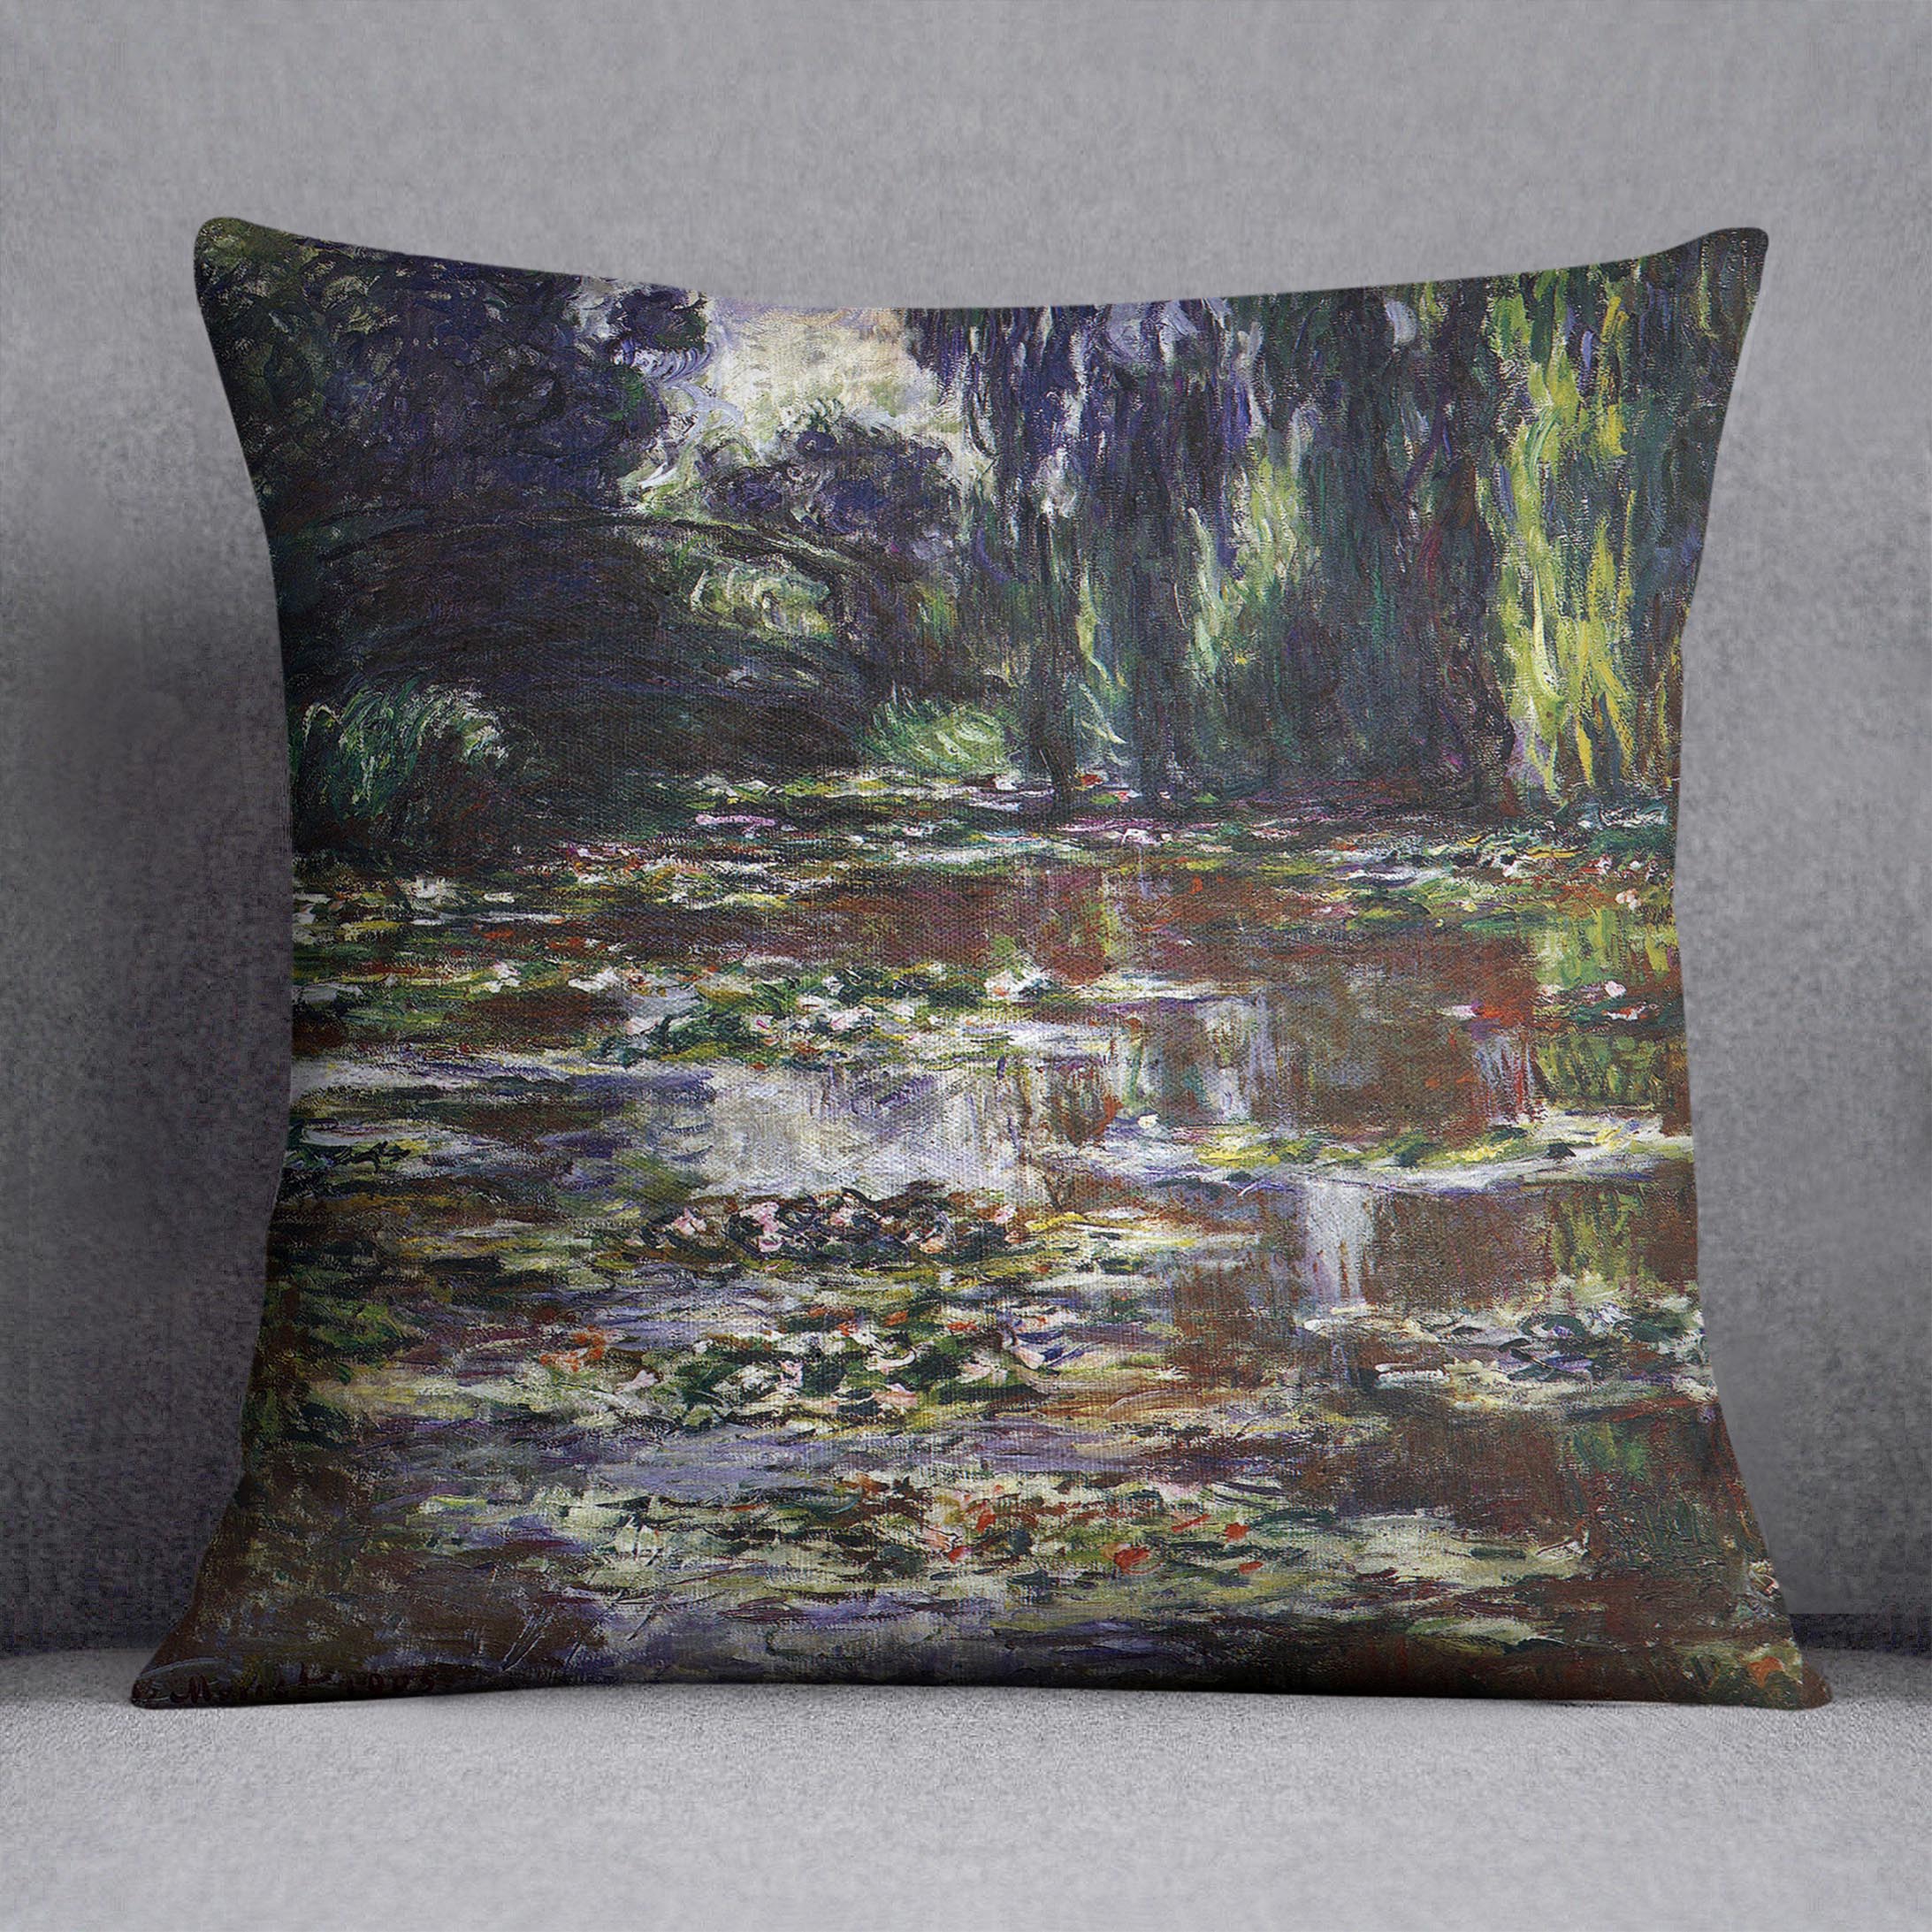 Water lilies water landscape 3 by Monet Cushion